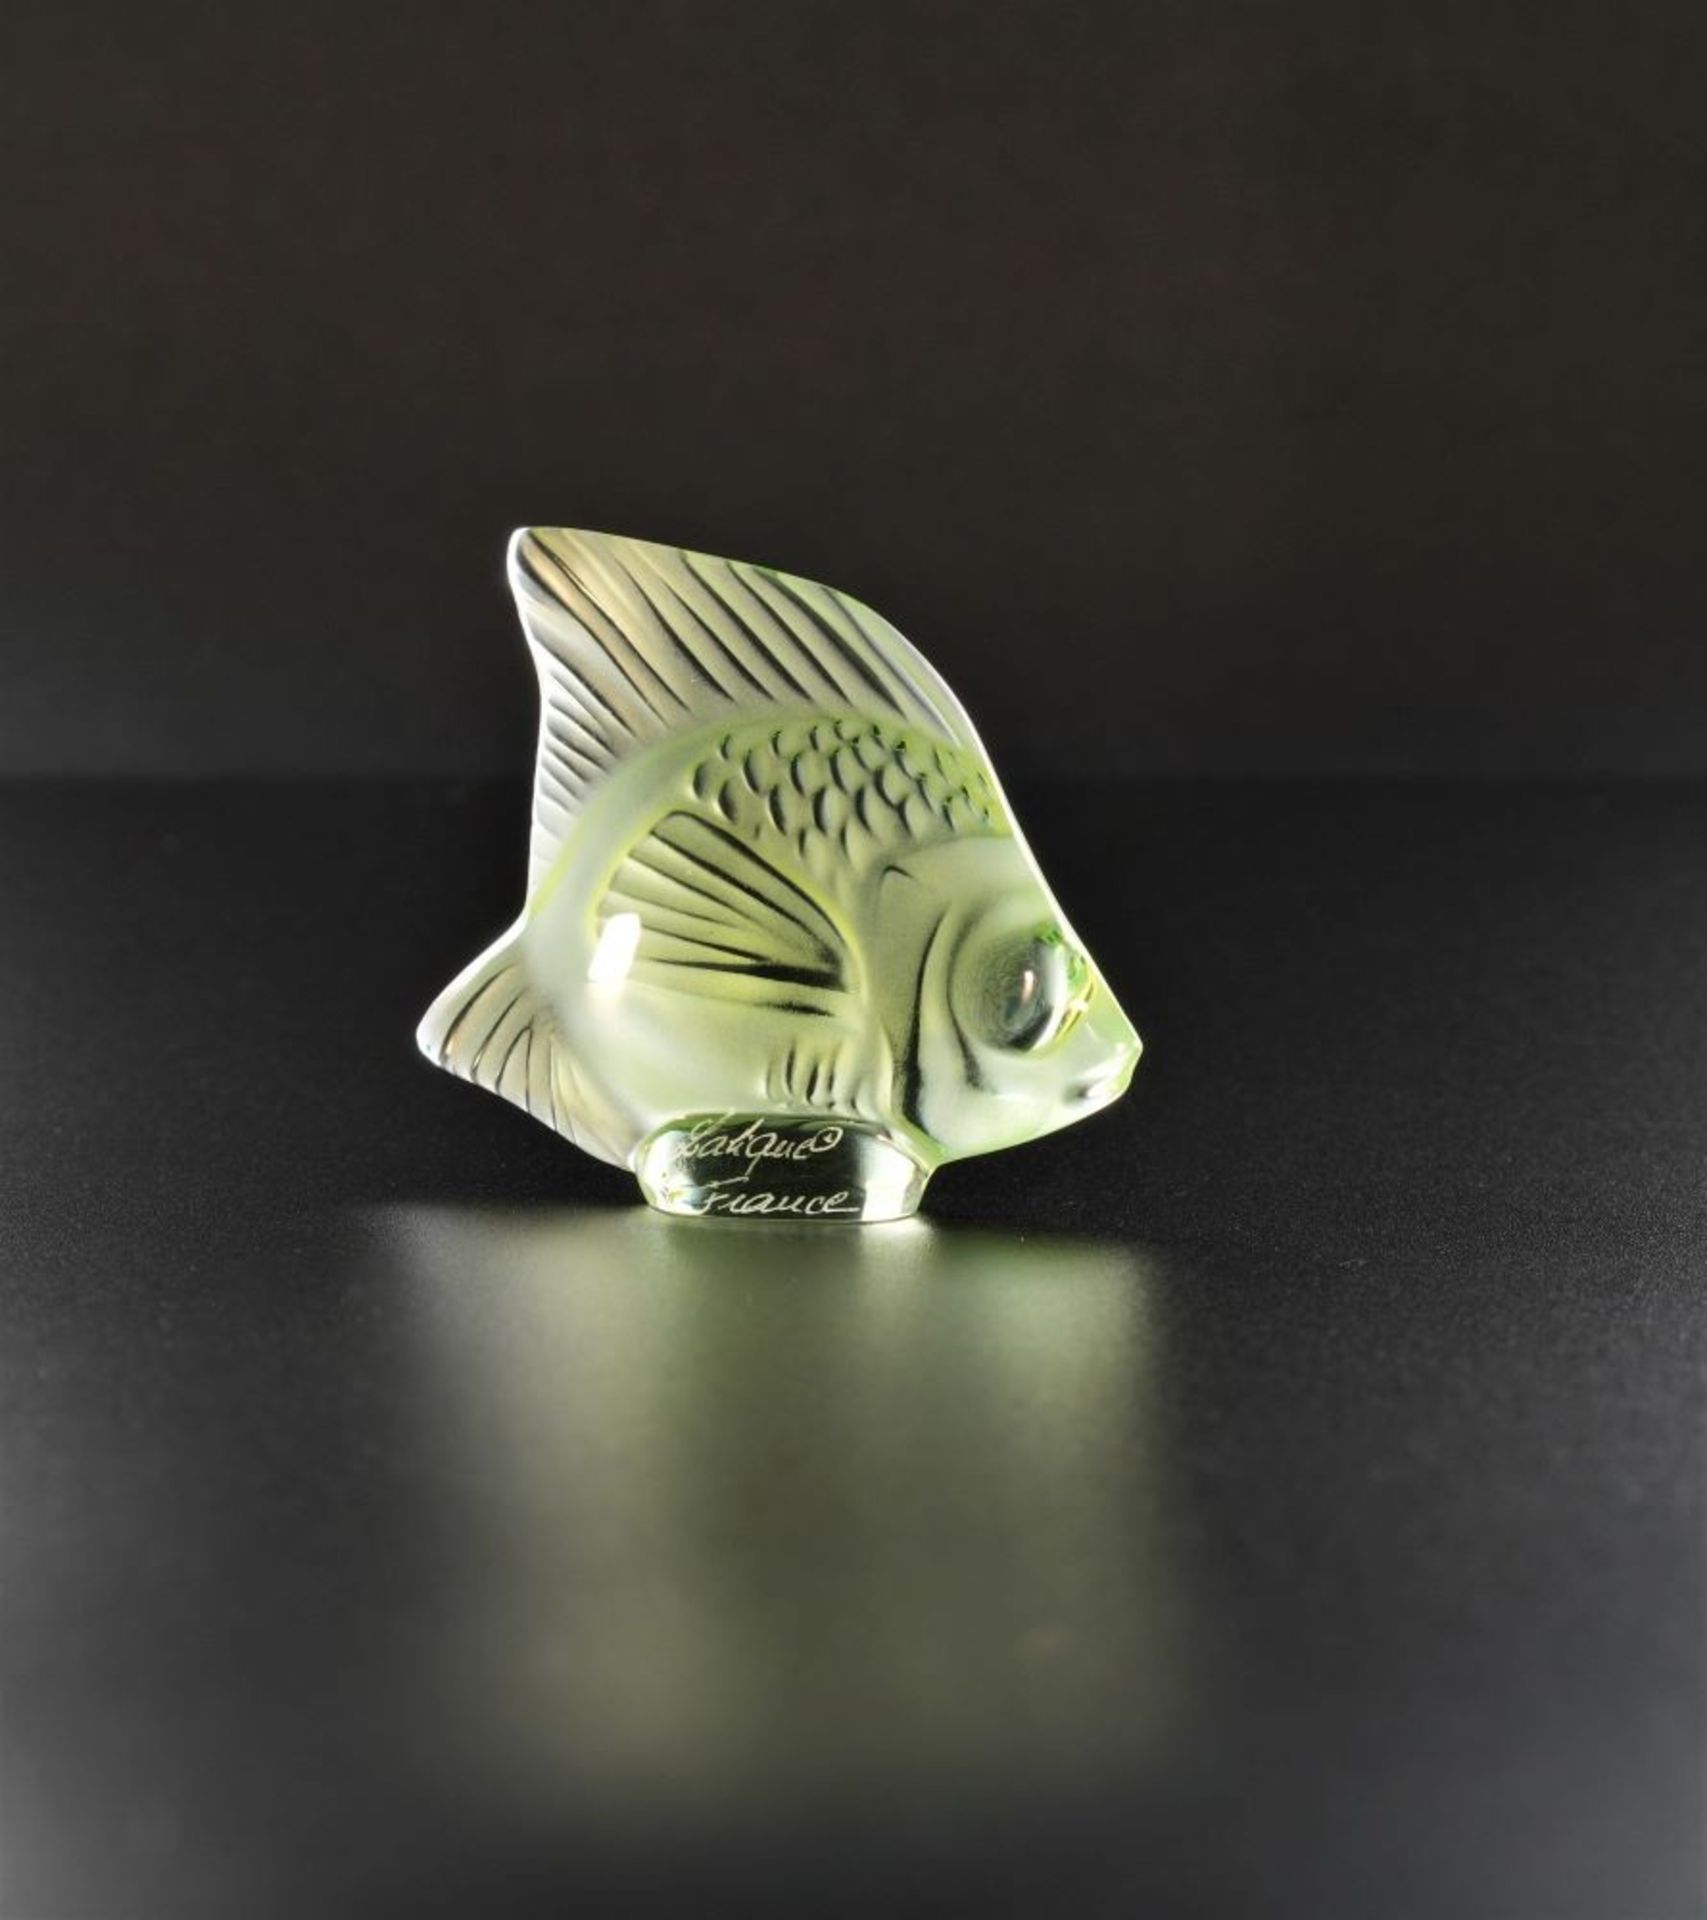 A LALIQUE Extra Small Fish Figure in Green Crystal from the Original 1912 Design by Rene Lalique. - Bild 2 aus 2